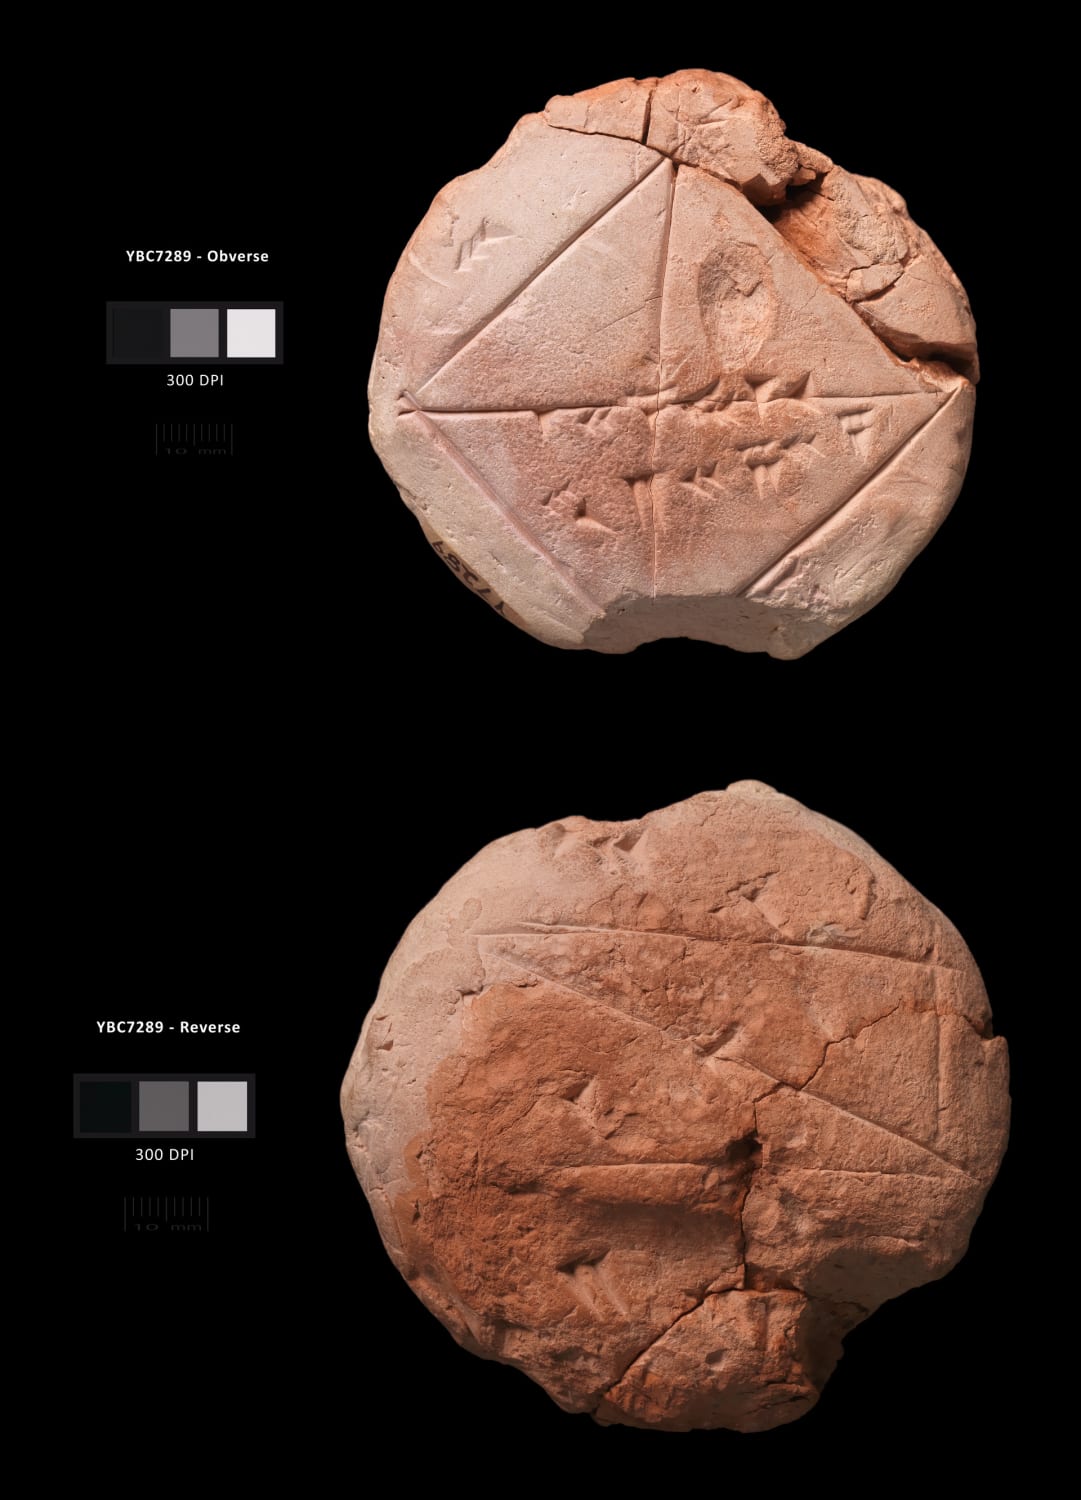 YBC 7289 is a Babylonian clay tablet that shows a drawing of a square with diagonal and inscribed numbers that shows a very high precision approximation of the square root of 2. 1800-1600 BCE, now part of the Yale Babylonian Collection